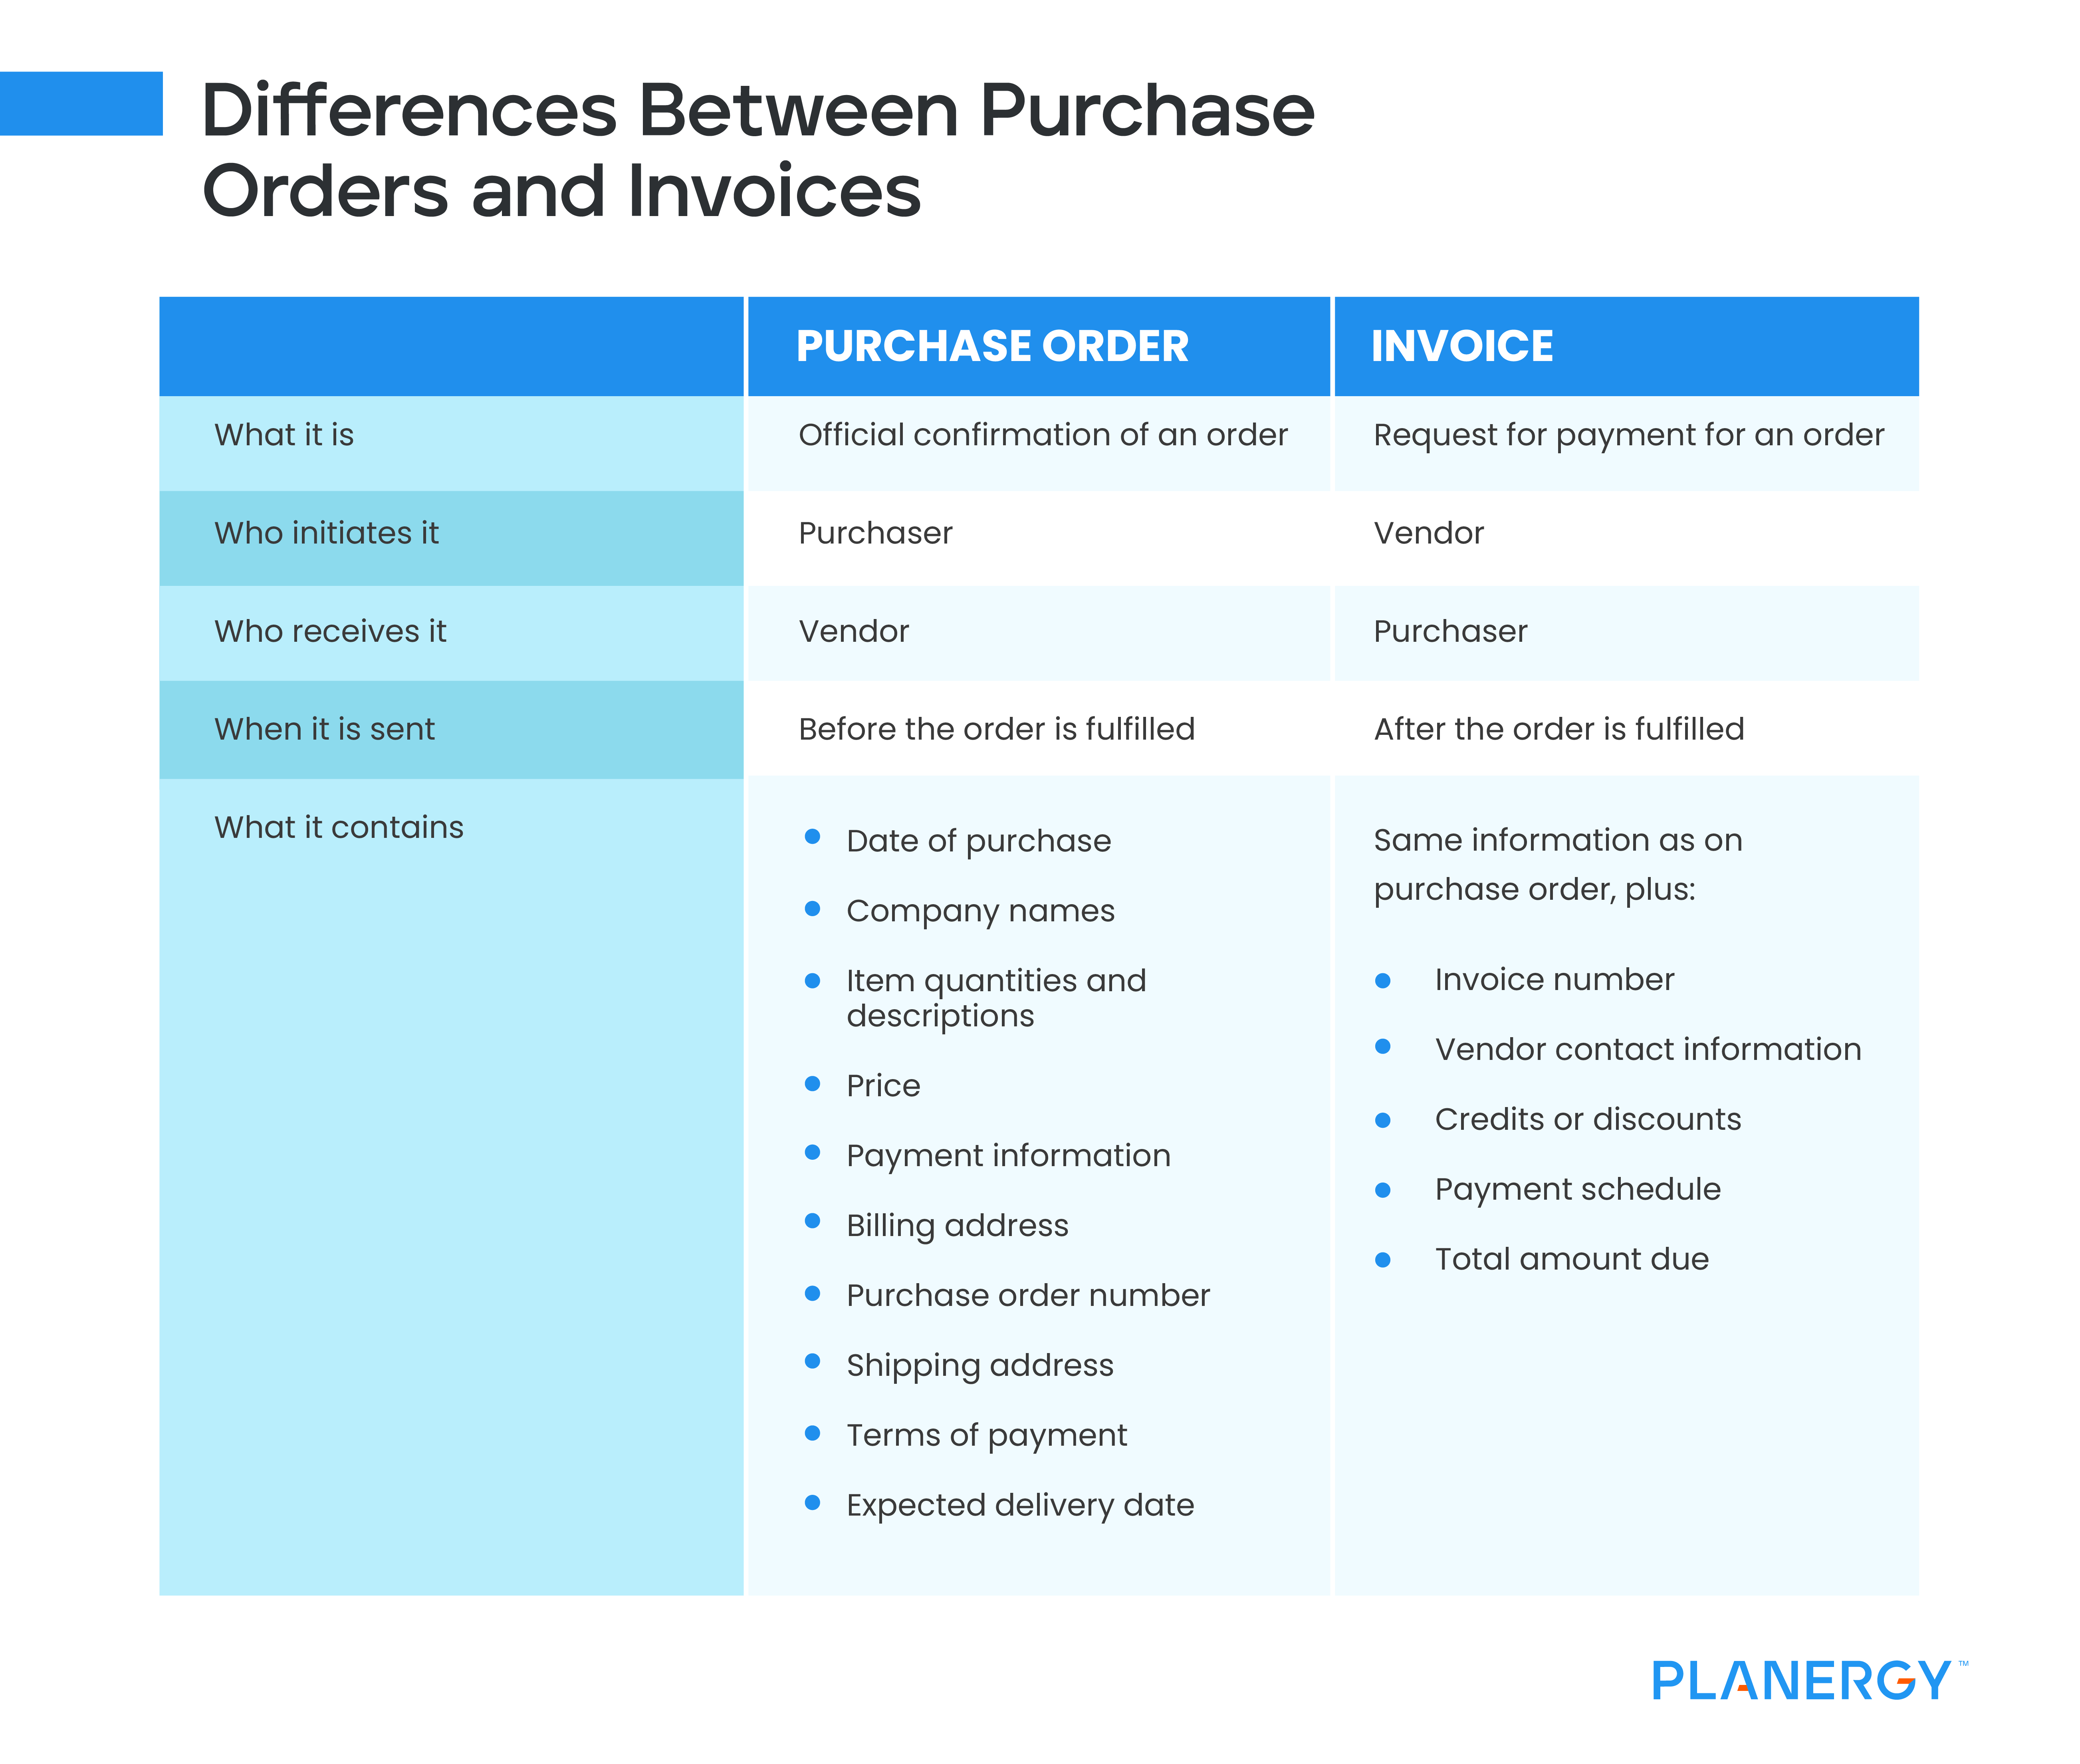 Differences Between Purchase Orders and Invoices